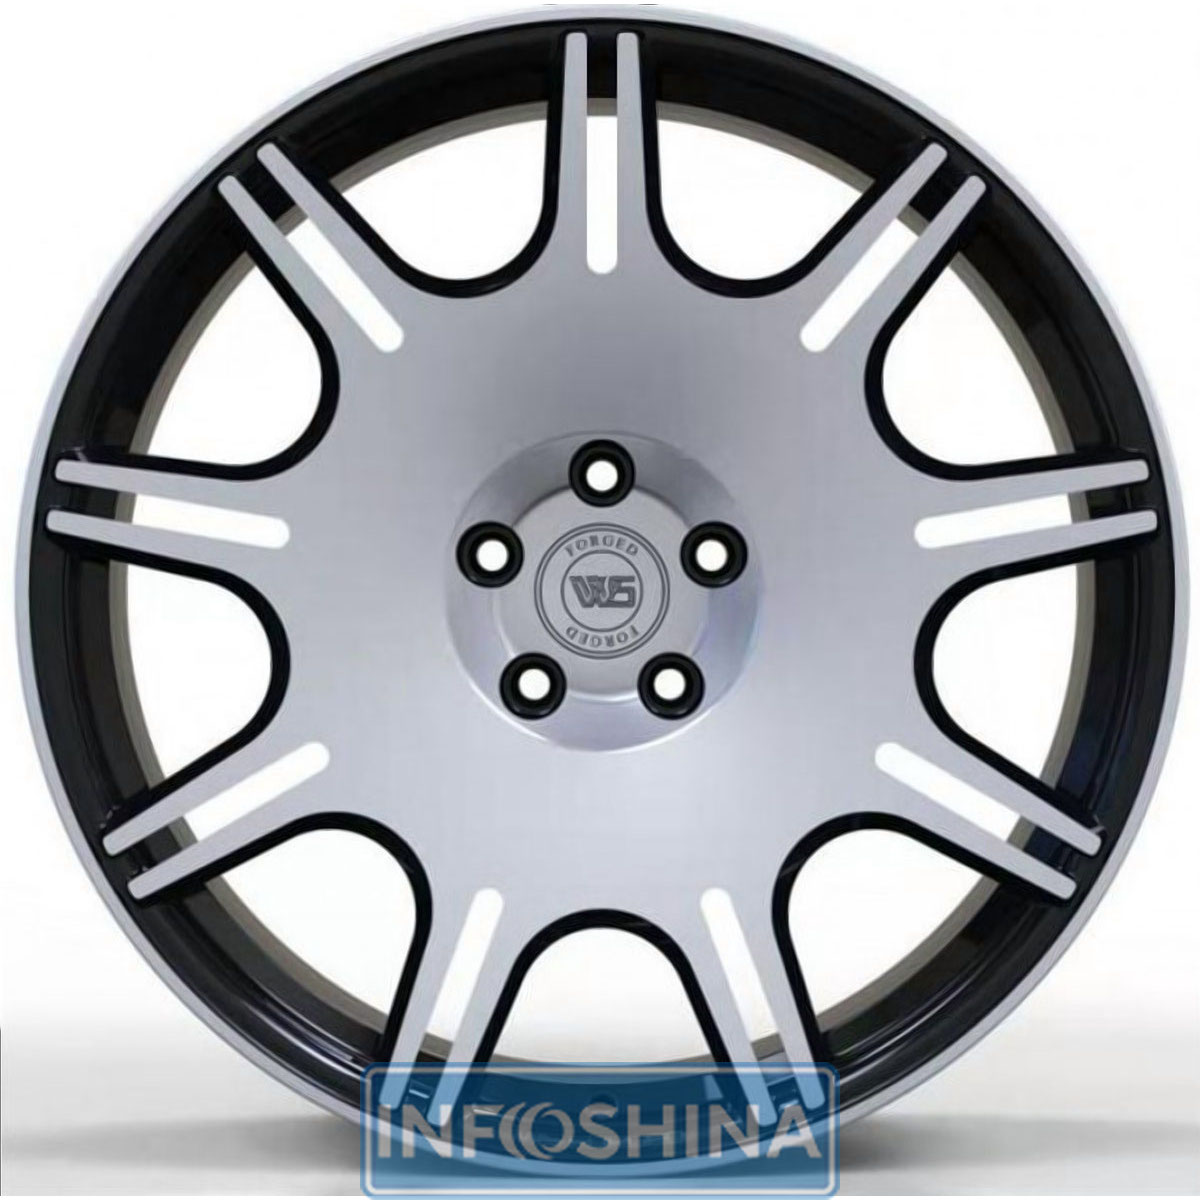 Купить диски WS Forged WS1249 Gloss Black With Machined Face R21 W10.5 PCD5x112 ET35 DIA66.6